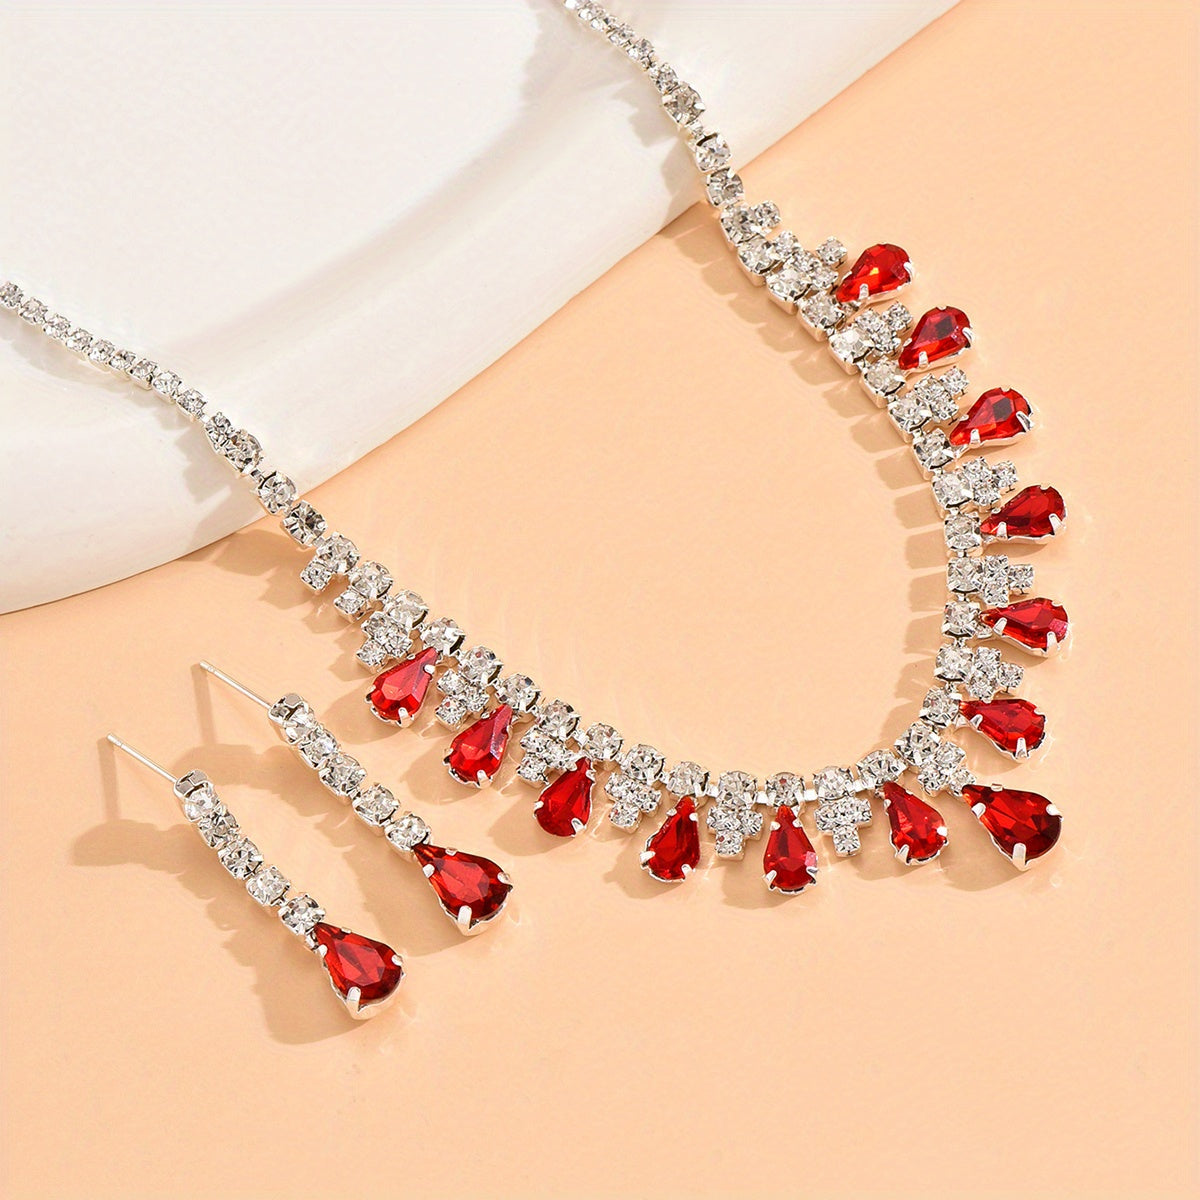 3 colors Elegant Rhinestone Wedding Jewelry Set - Silver Plated Necklace and Earrings with Royal Blue, Red, and White Stones